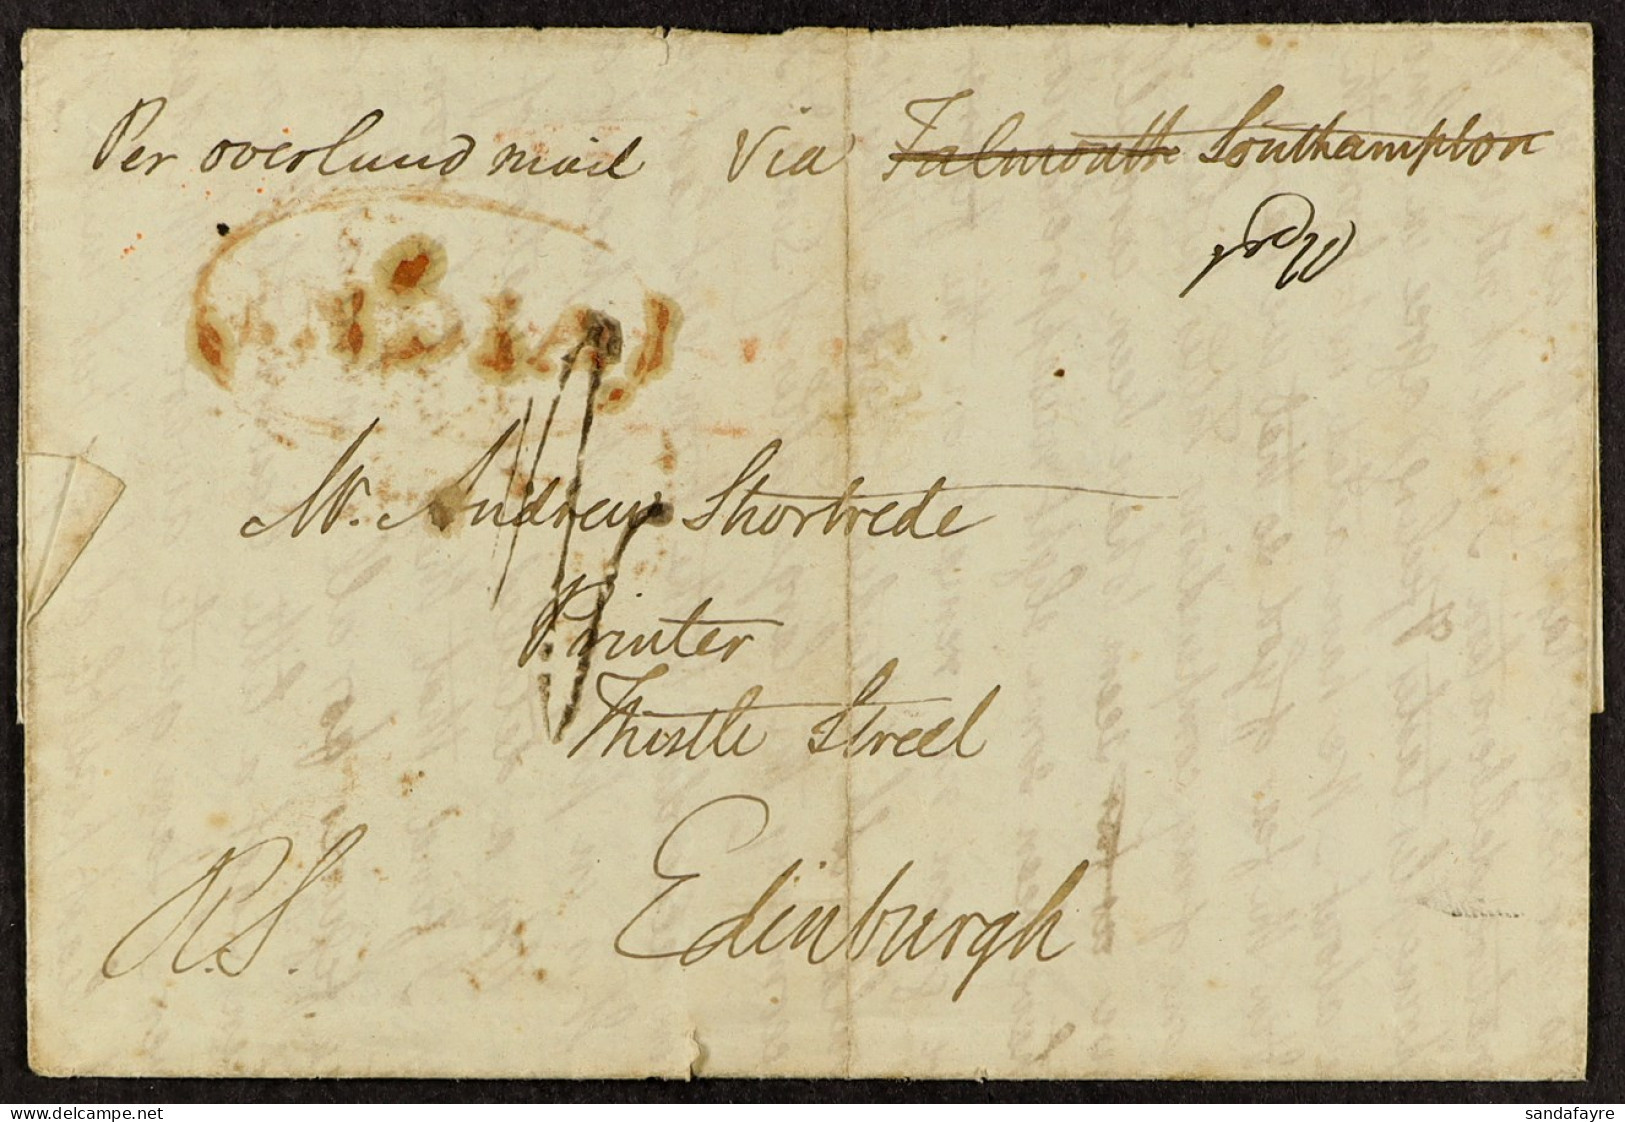 STAMP - 1843 (19th Dec) A Letter With A Number Of Postal Markings From Allahabad, INDIA, To Edinburgh, Scotland, Via Sou - ...-1840 Voorlopers